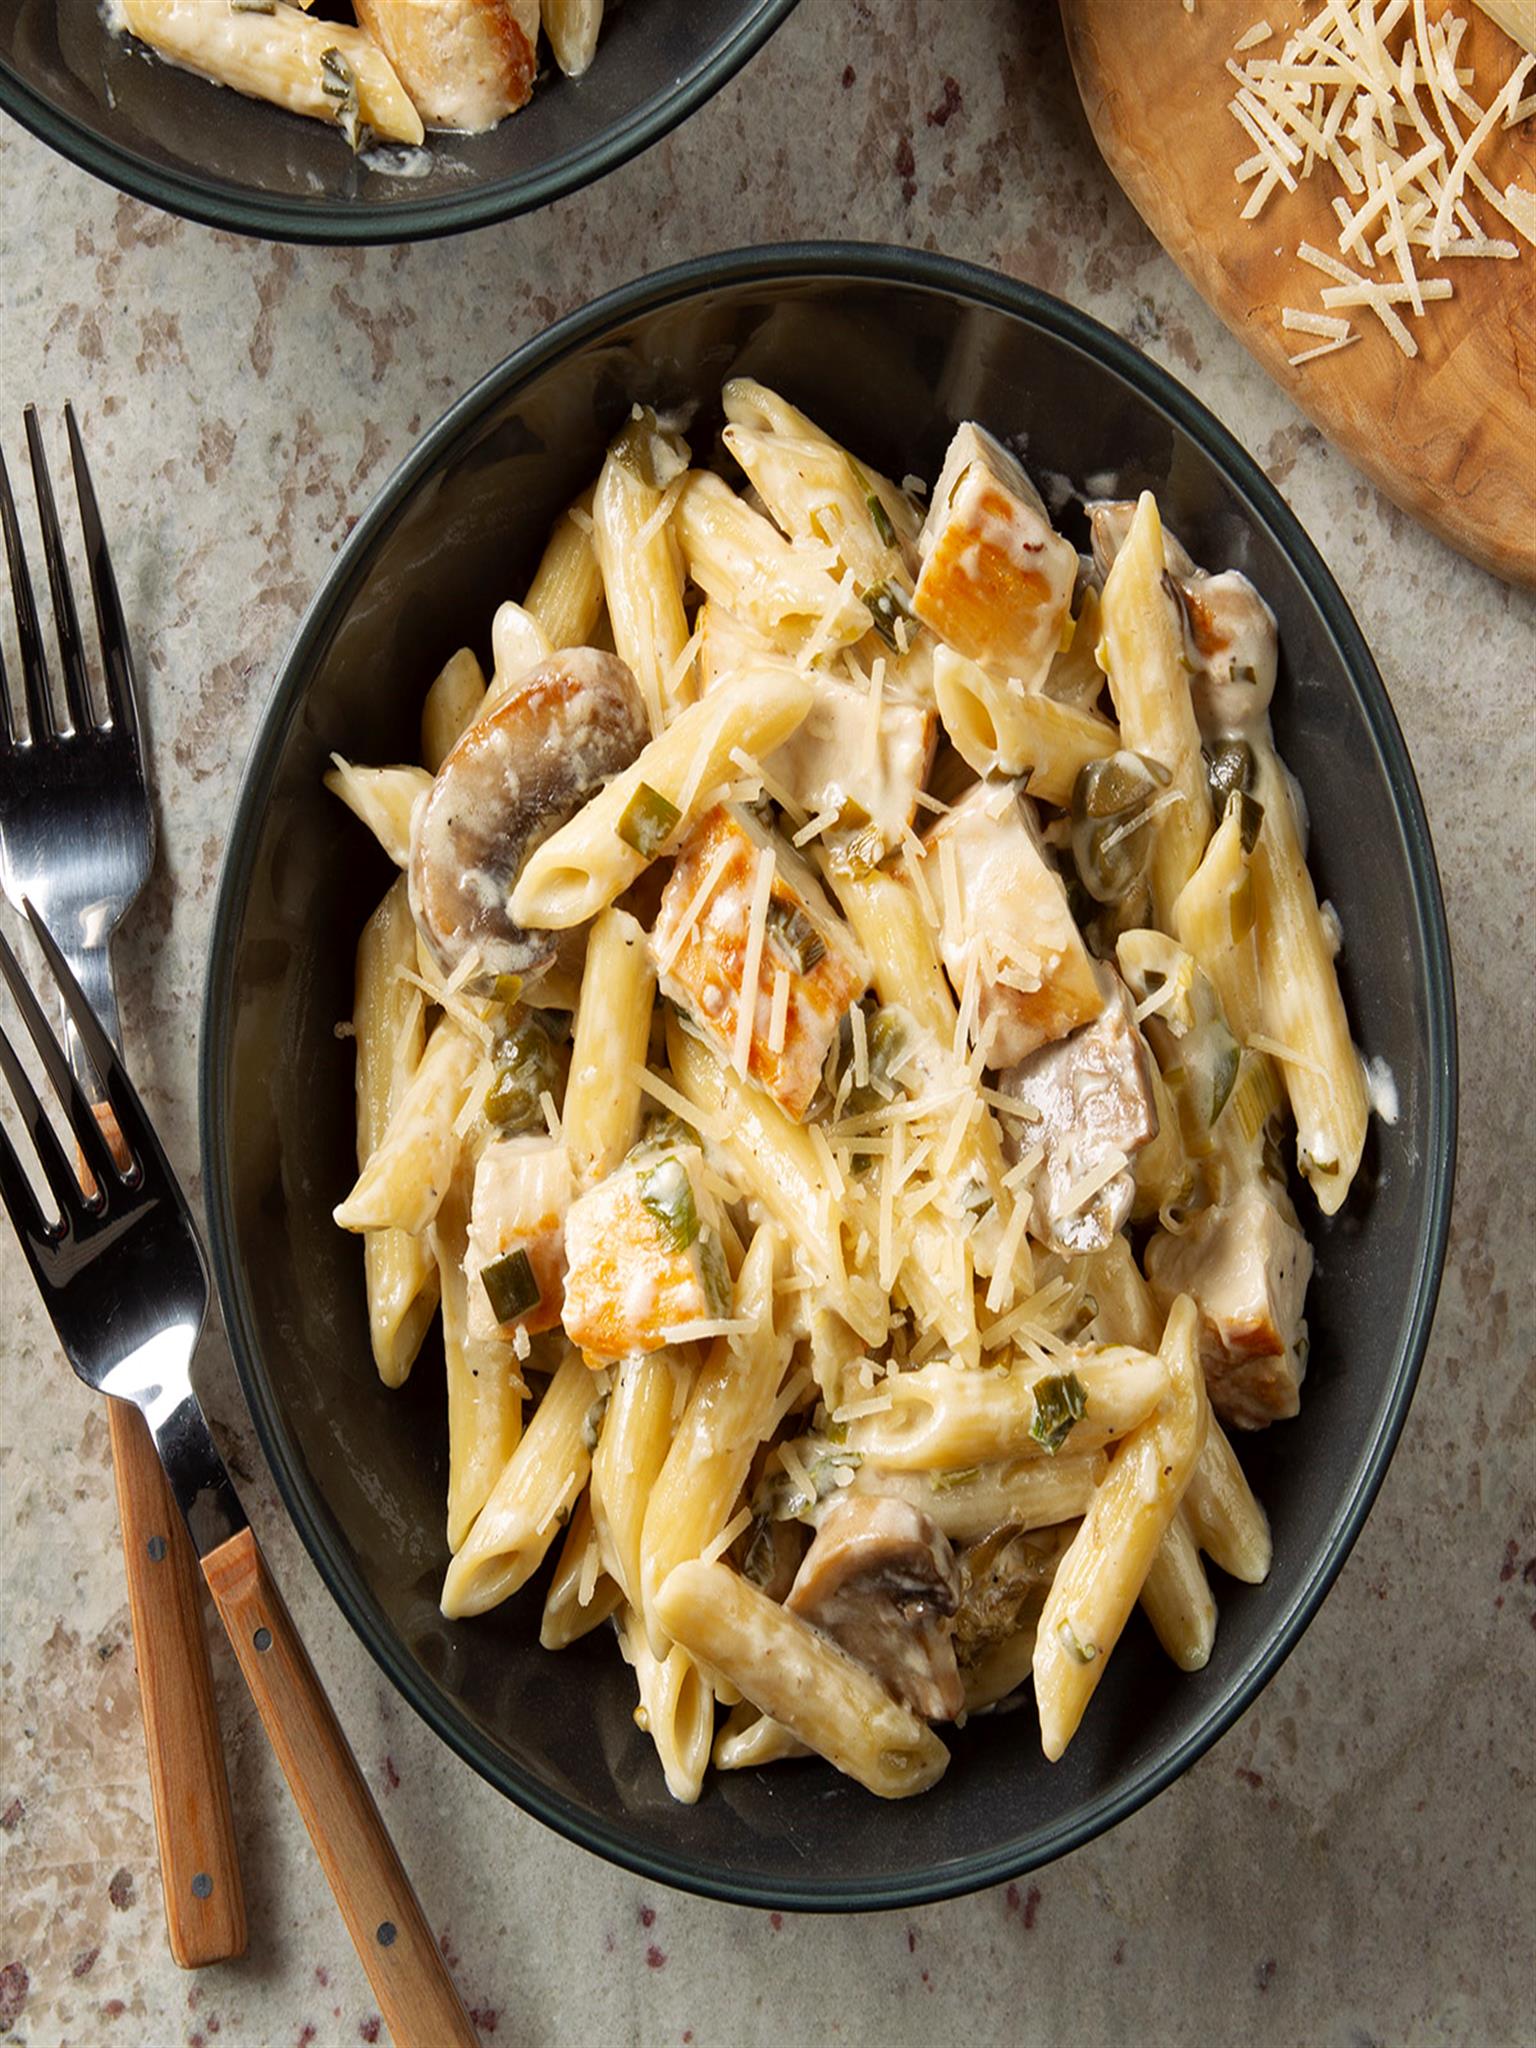 Creamy Chicken and Pasta Recipe: How to Make It